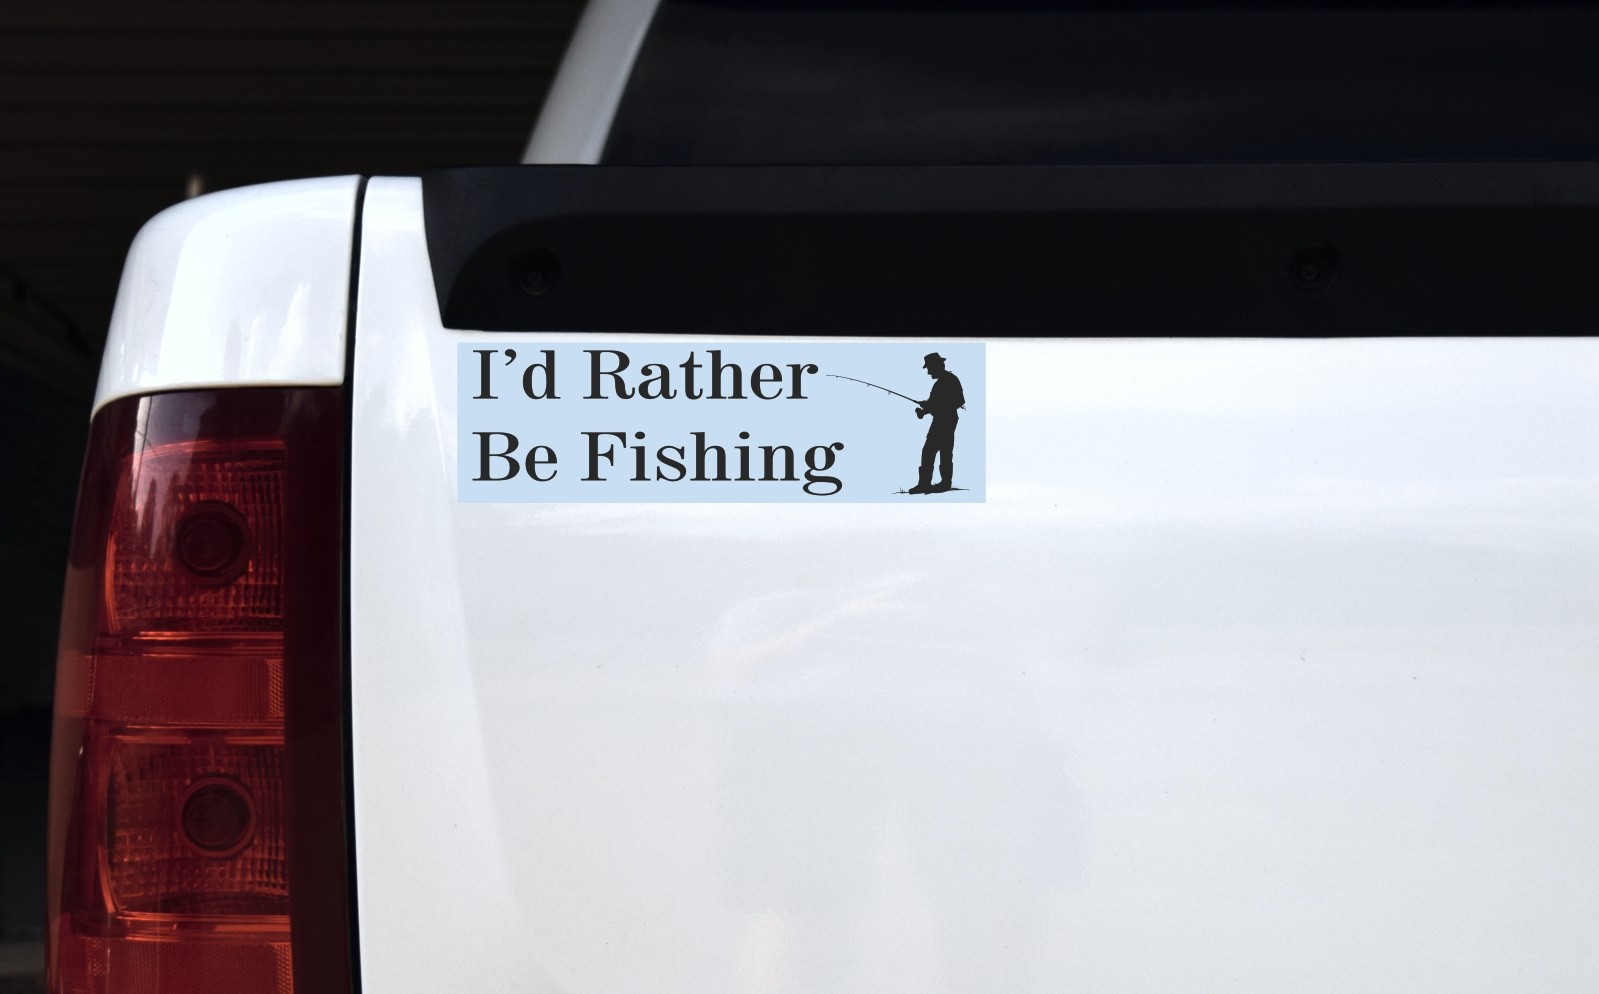 10in x 3in ID Rather Be Fishing Vinyl Sticker, White